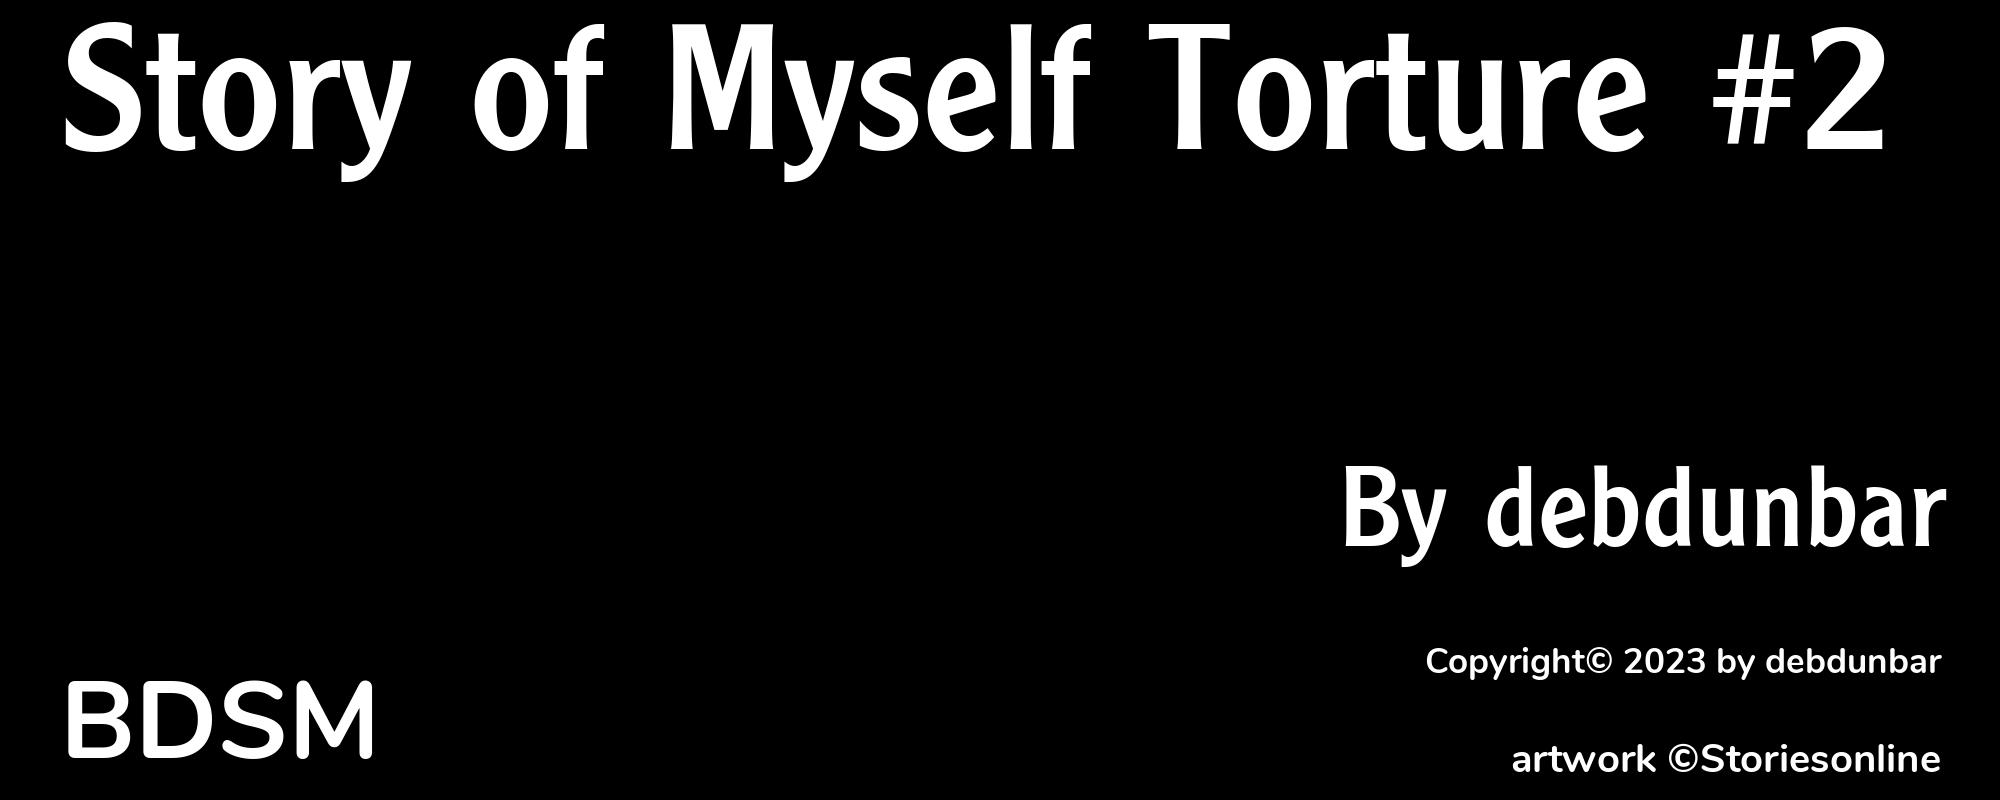 Story of Myself Torture #2 - Cover